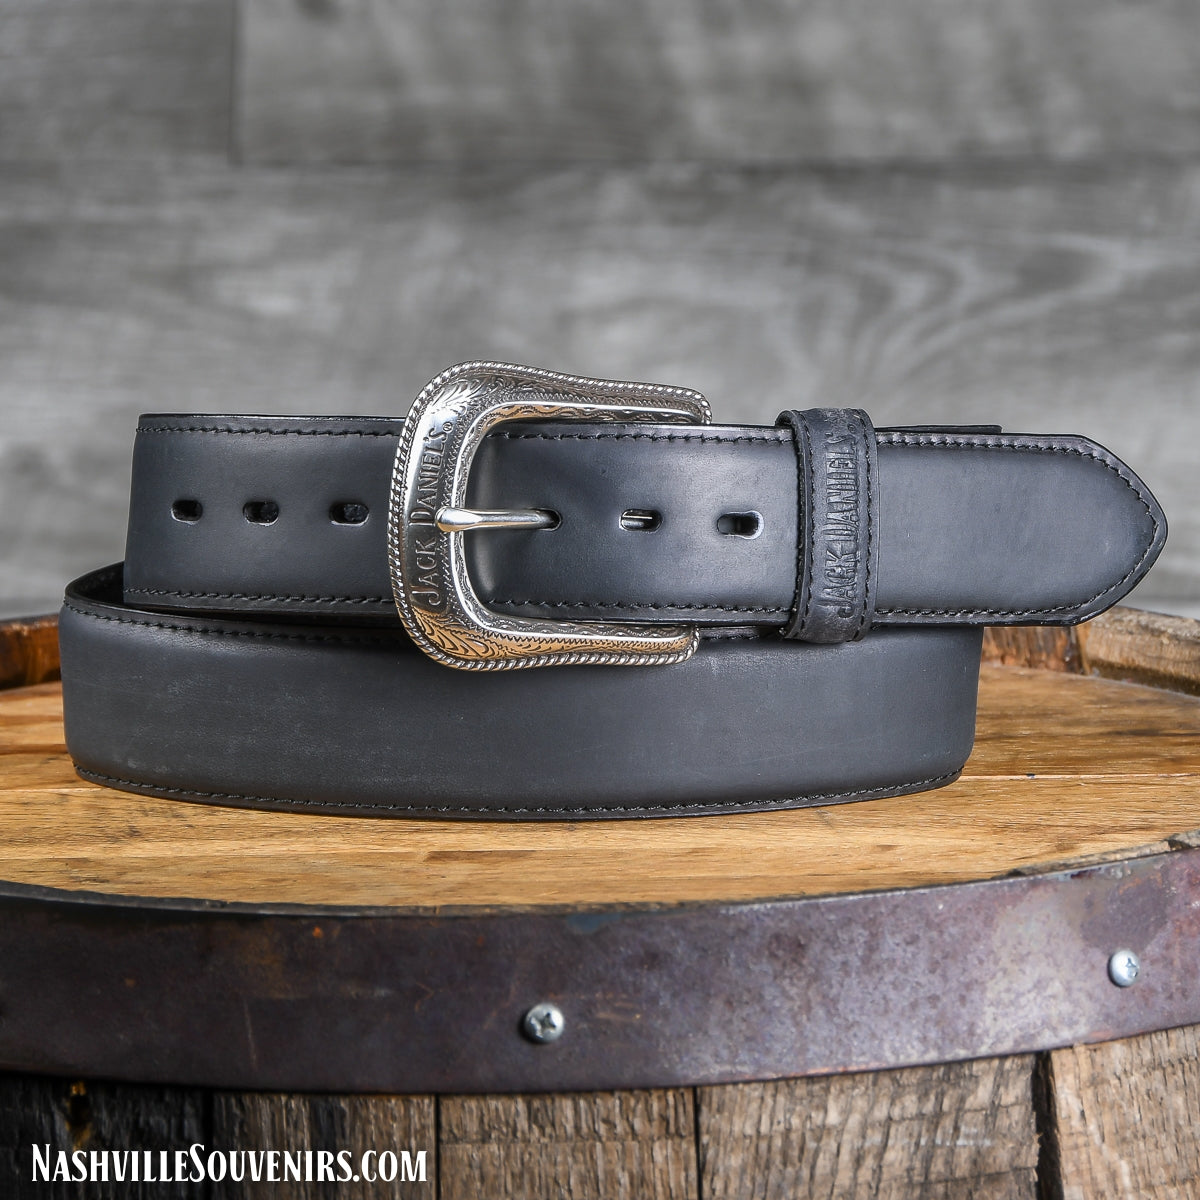 Officially licensed Jack Daniels Belt in Black Leather with Ornate Silver Buckle with silver rivets. Get yours today with FREE SHIPPING on all US orders over $75!